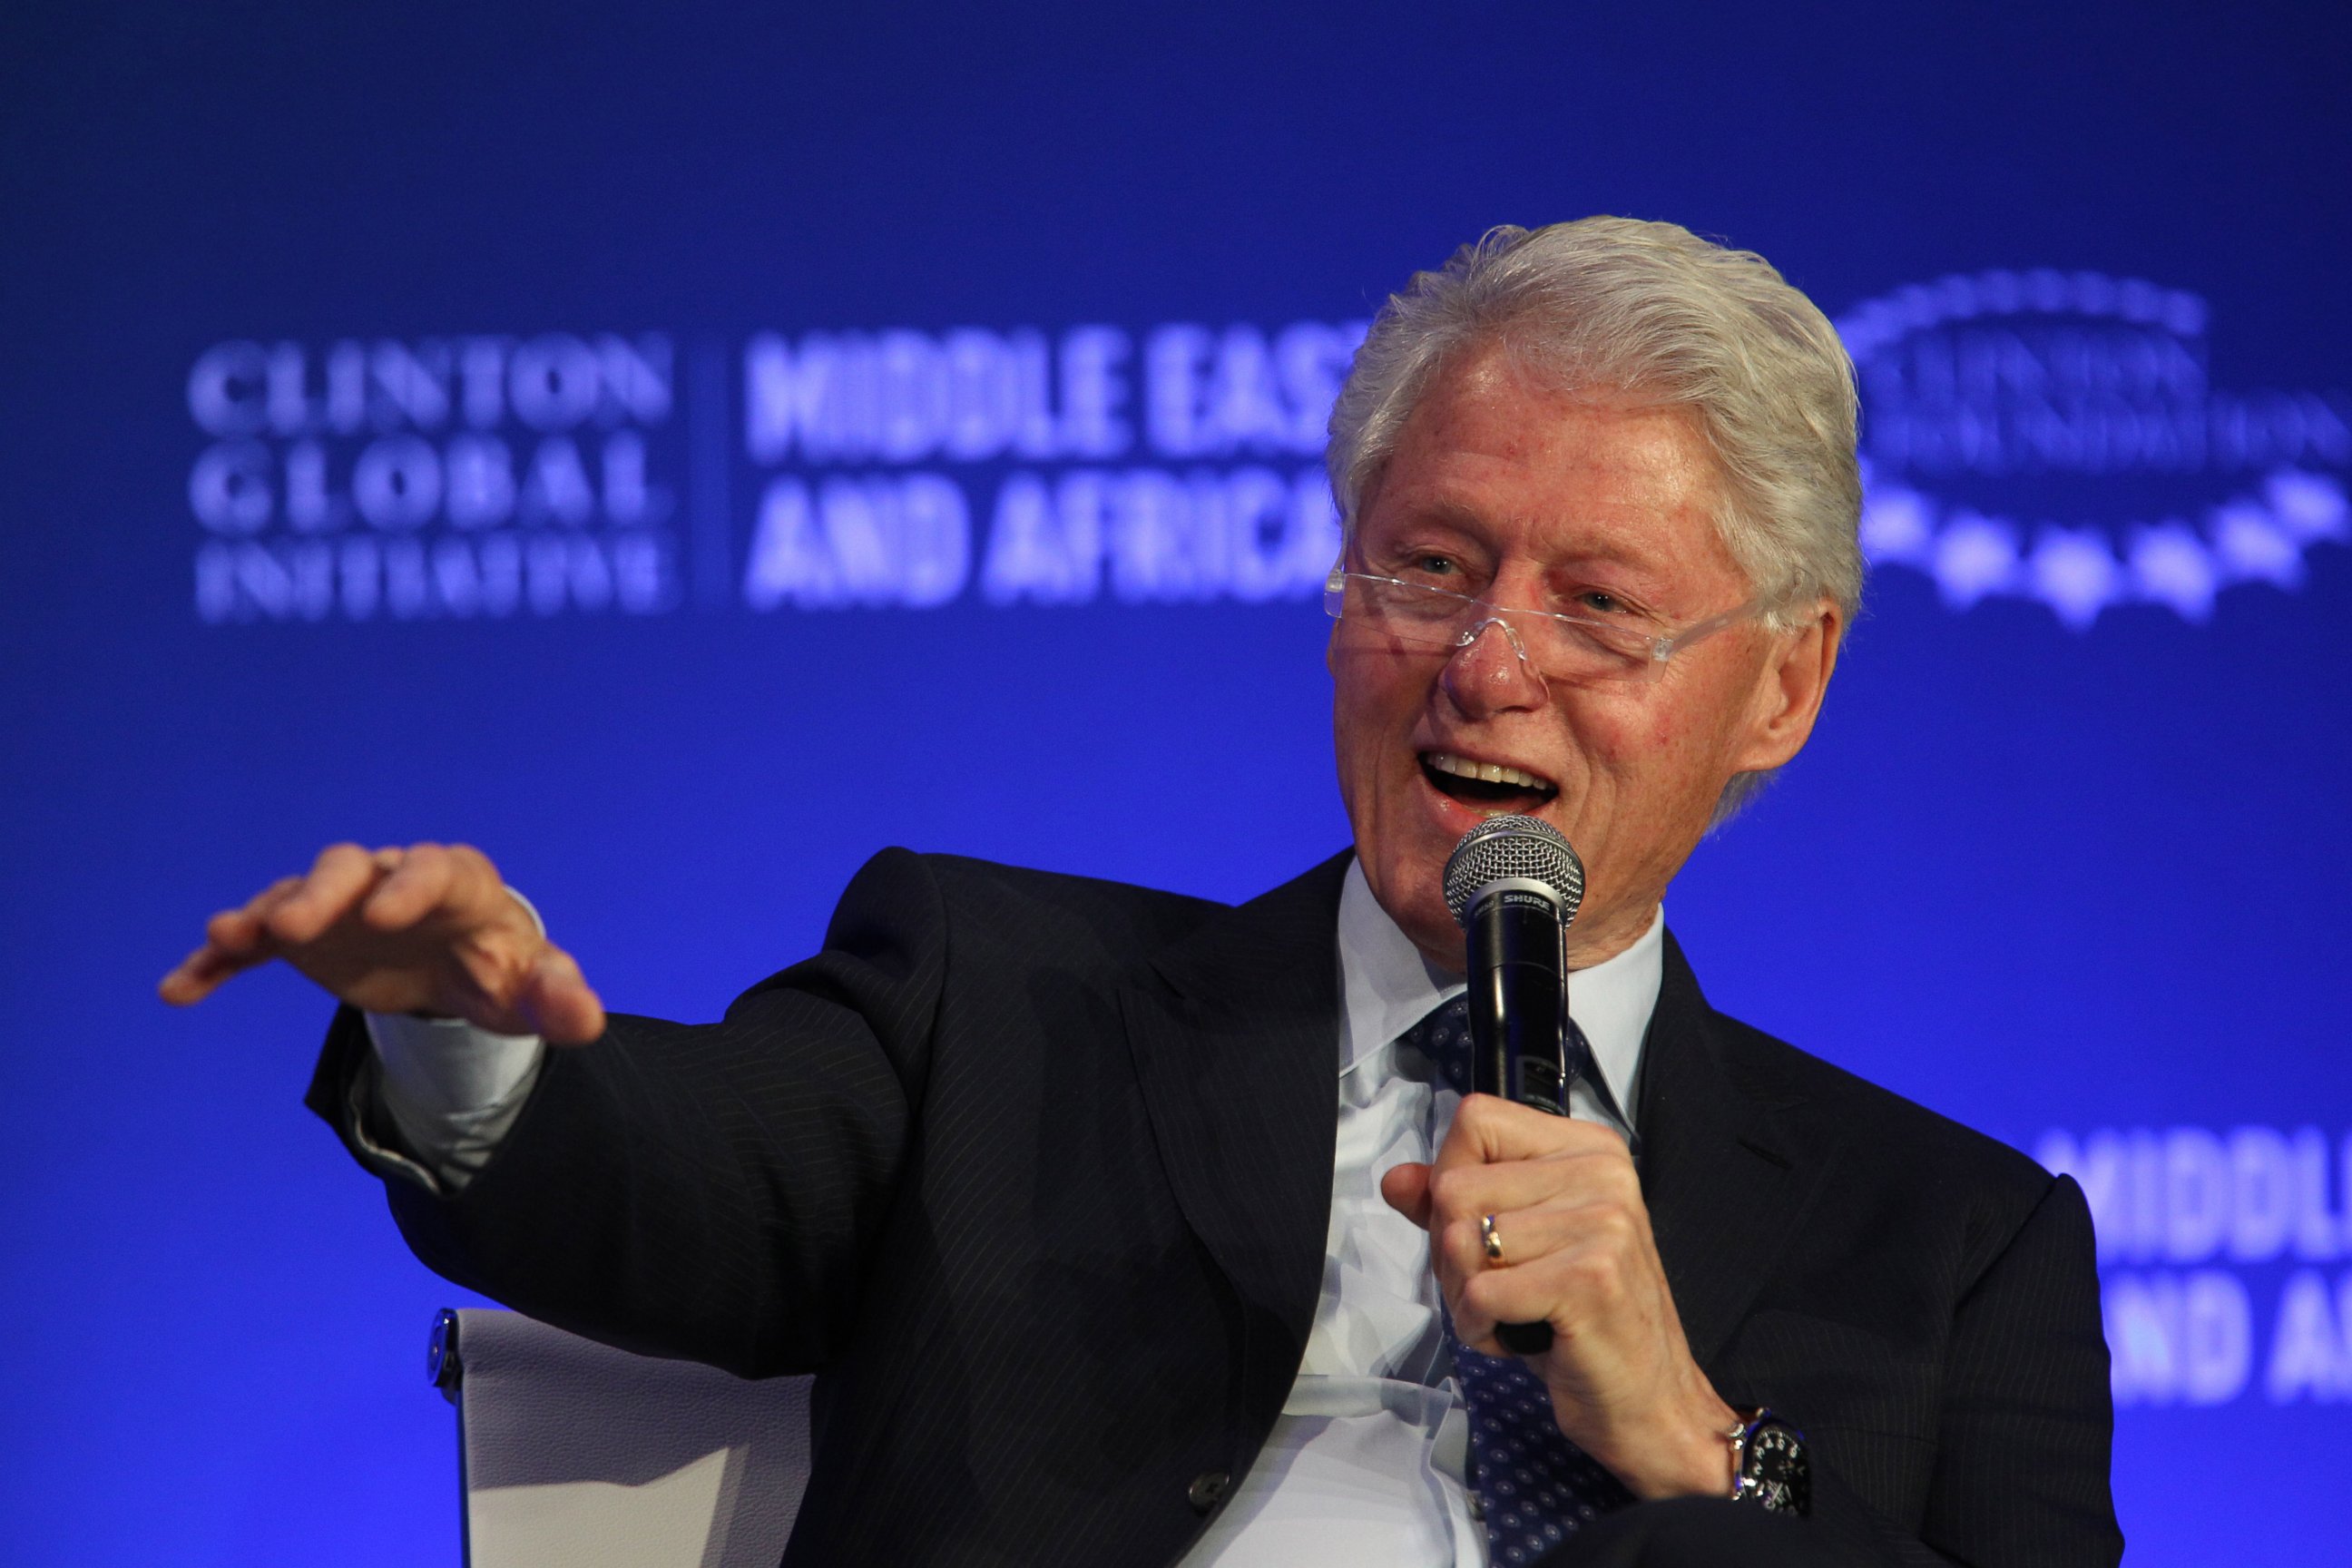 PHOTO: Former U.S President Bill Clinton speaks during a plenary session at the Clinton Global Initiative Middle East & Africa meeting in Marrakech, Morocco, May 6, 2015.